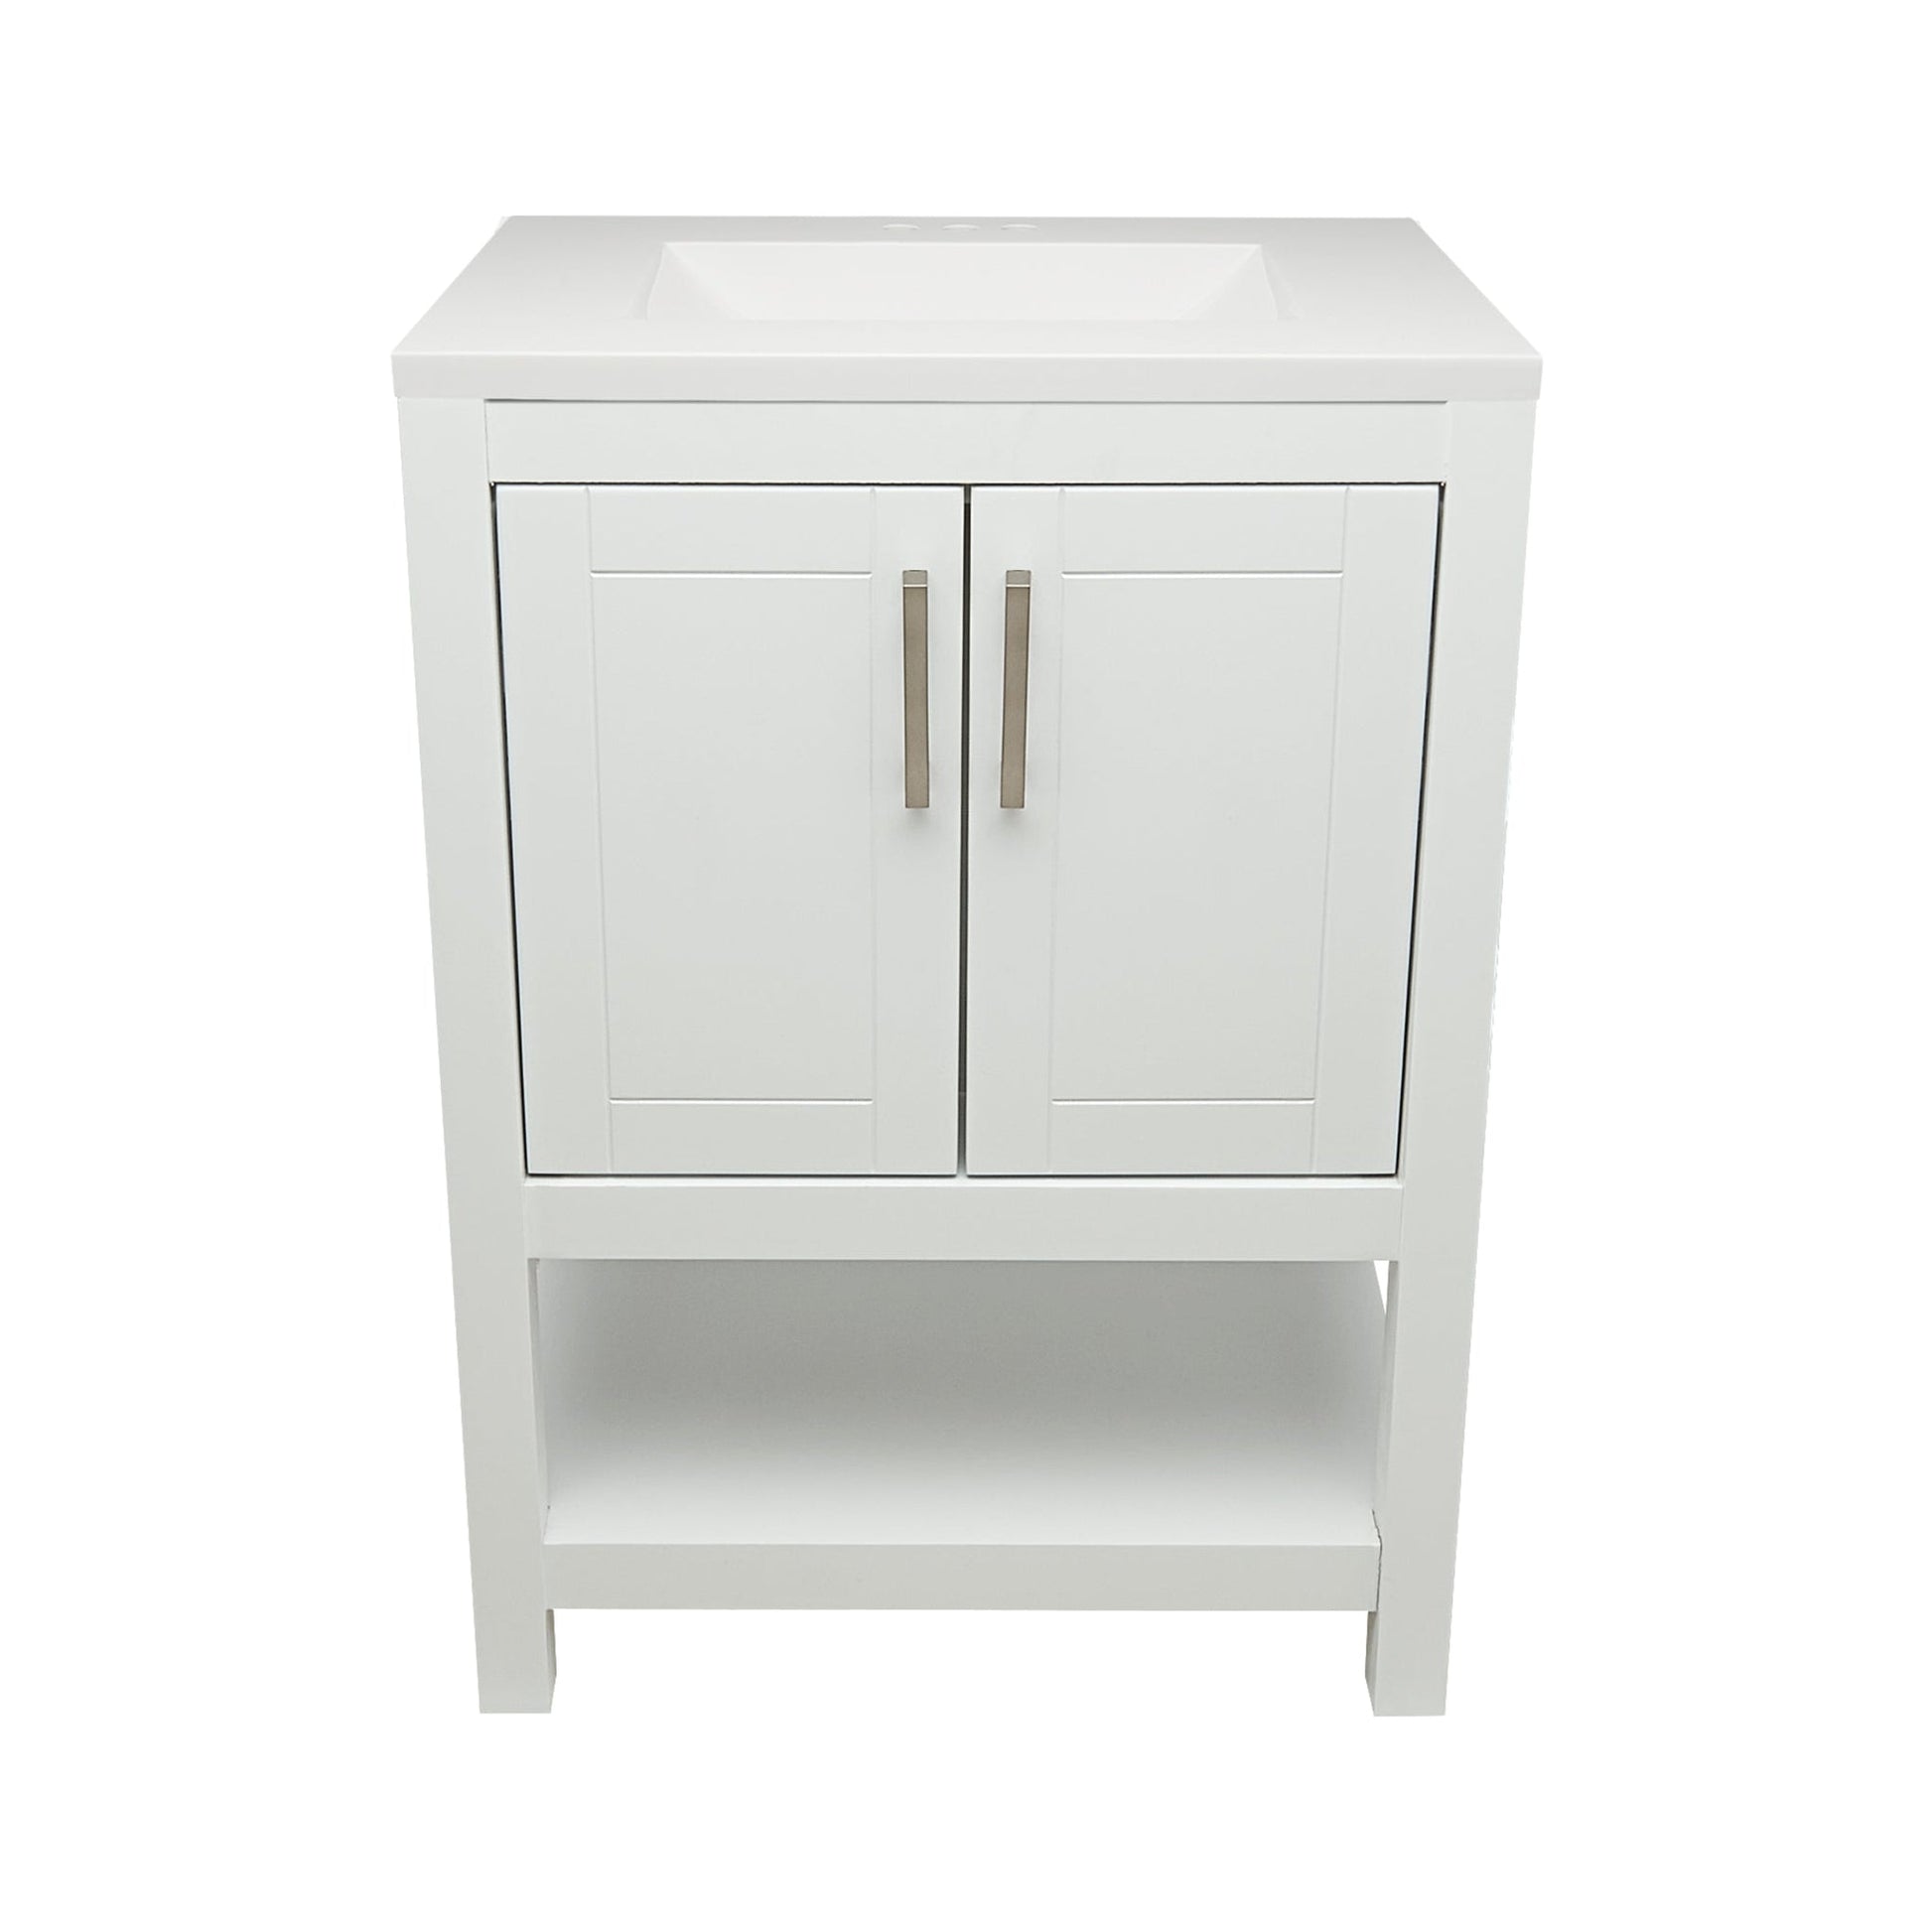 Ella's Bubbles Taos 25" White Bathroom Vanity With White Cultured Marble Top and Sink